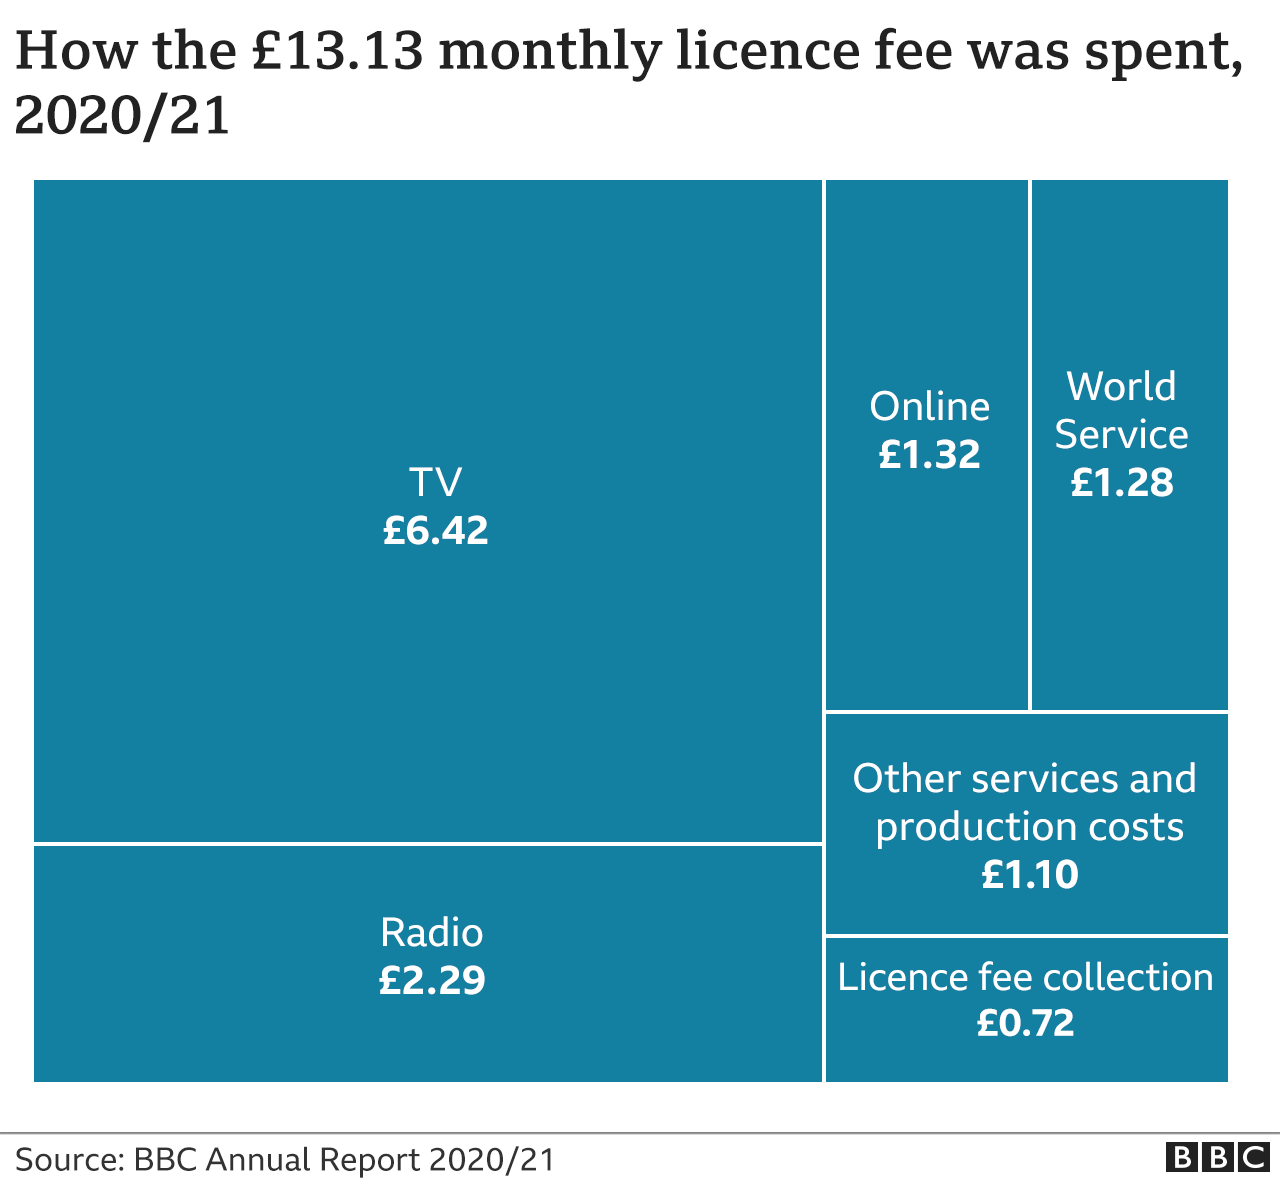 How the Licence Fee was spent, 2020-2021